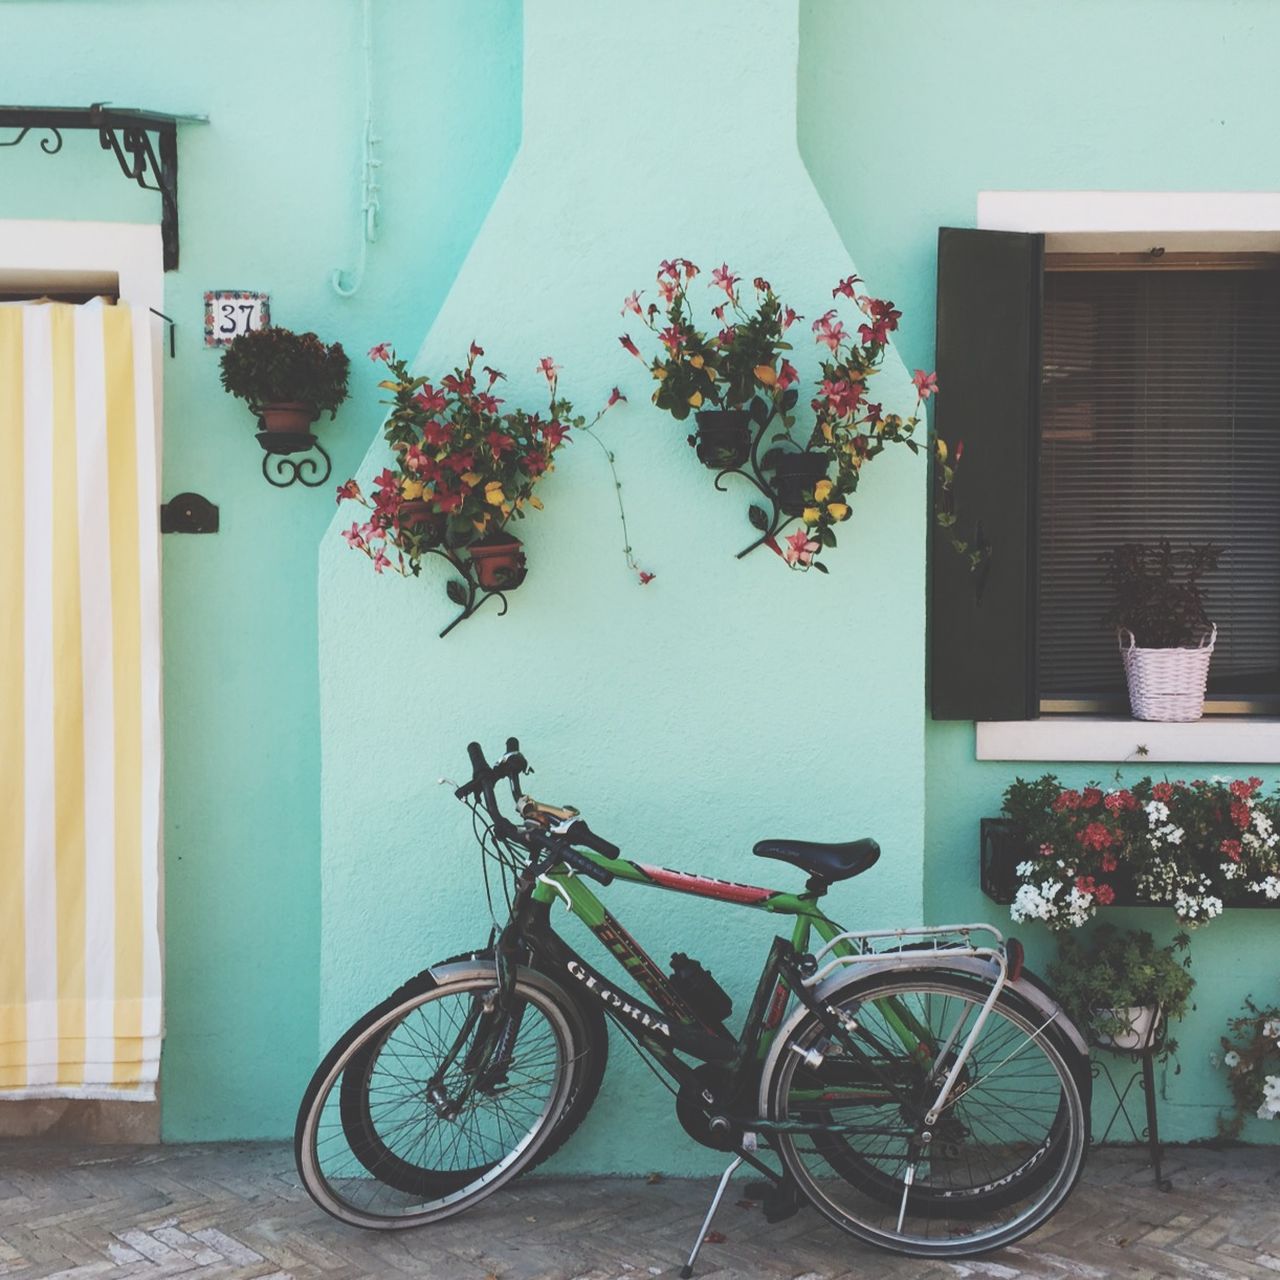 bicycle, parked, land vehicle, mode of transport, stationary, transportation, parking, building exterior, architecture, built structure, flower, potted plant, wall - building feature, wall, house, plant, window, day, sidewalk, no people